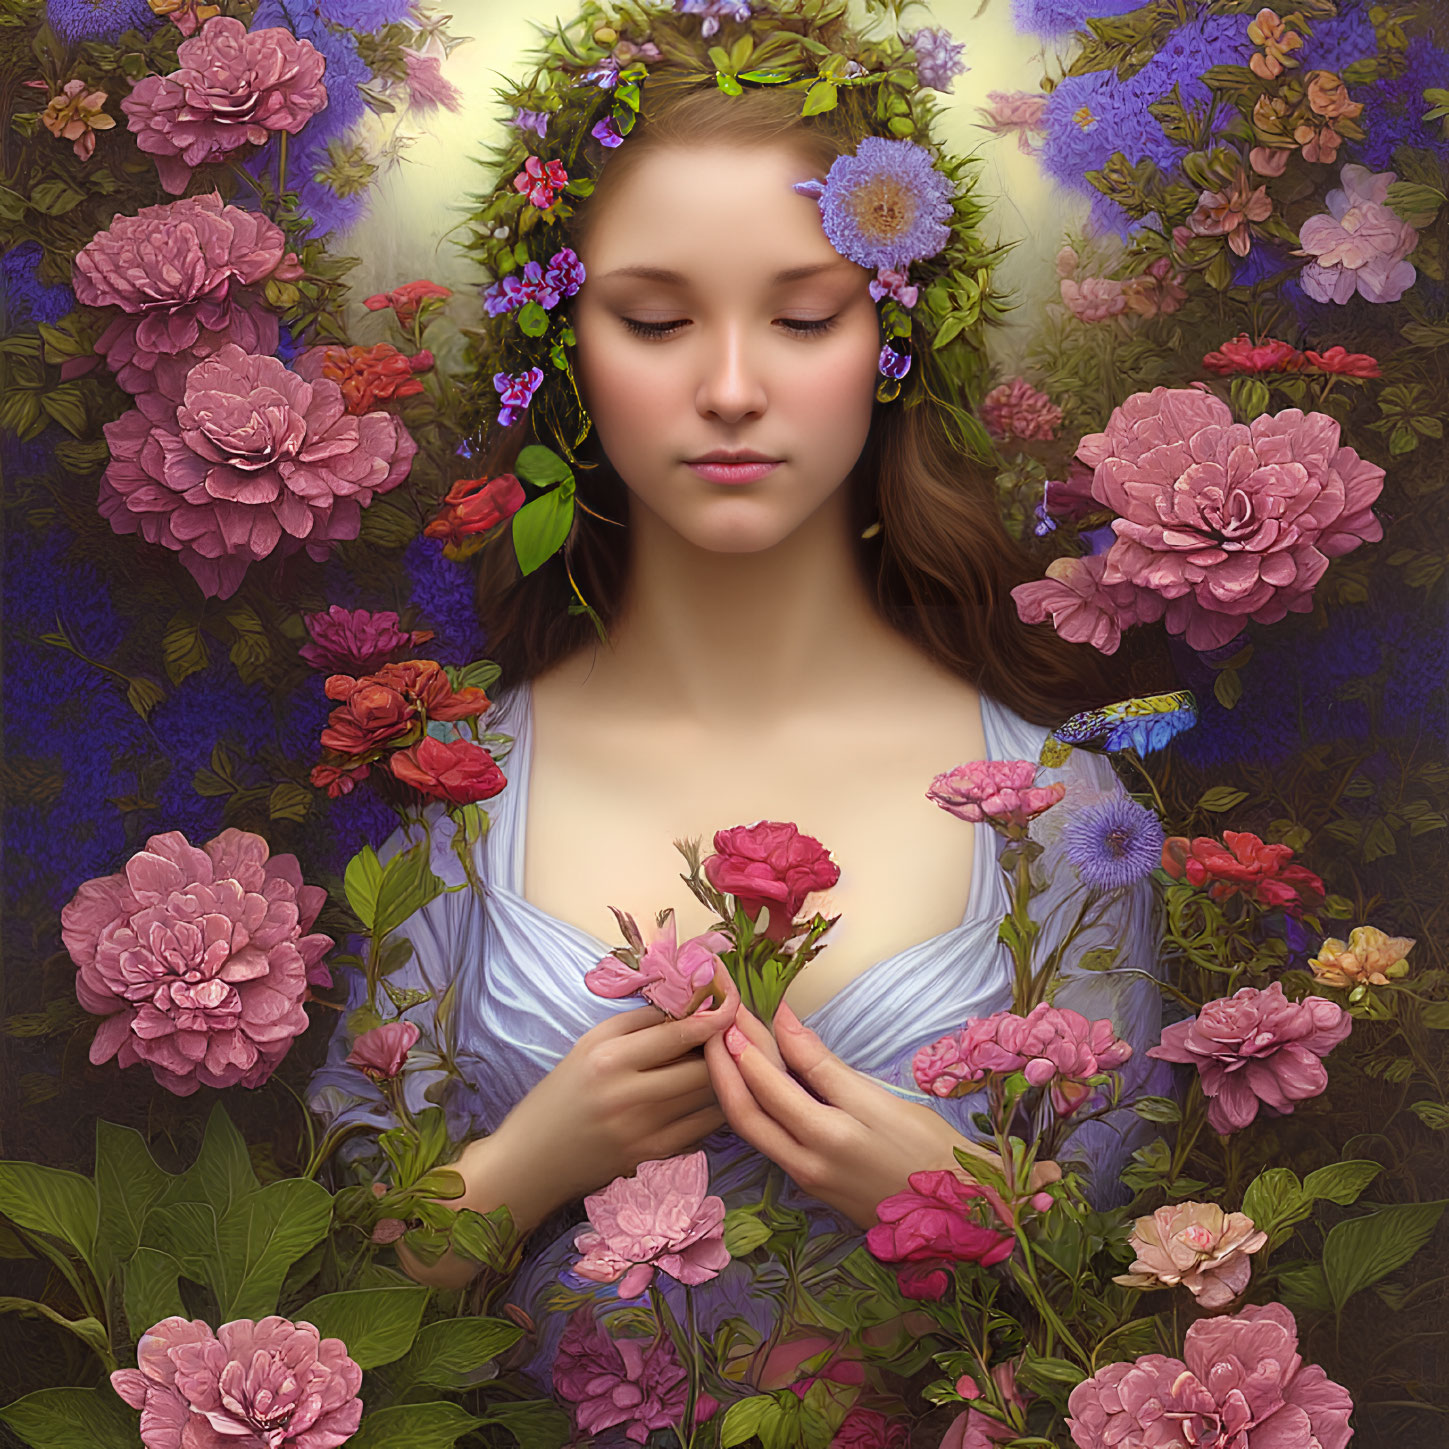 Young woman with floral wreath holding pink rose in flower garden